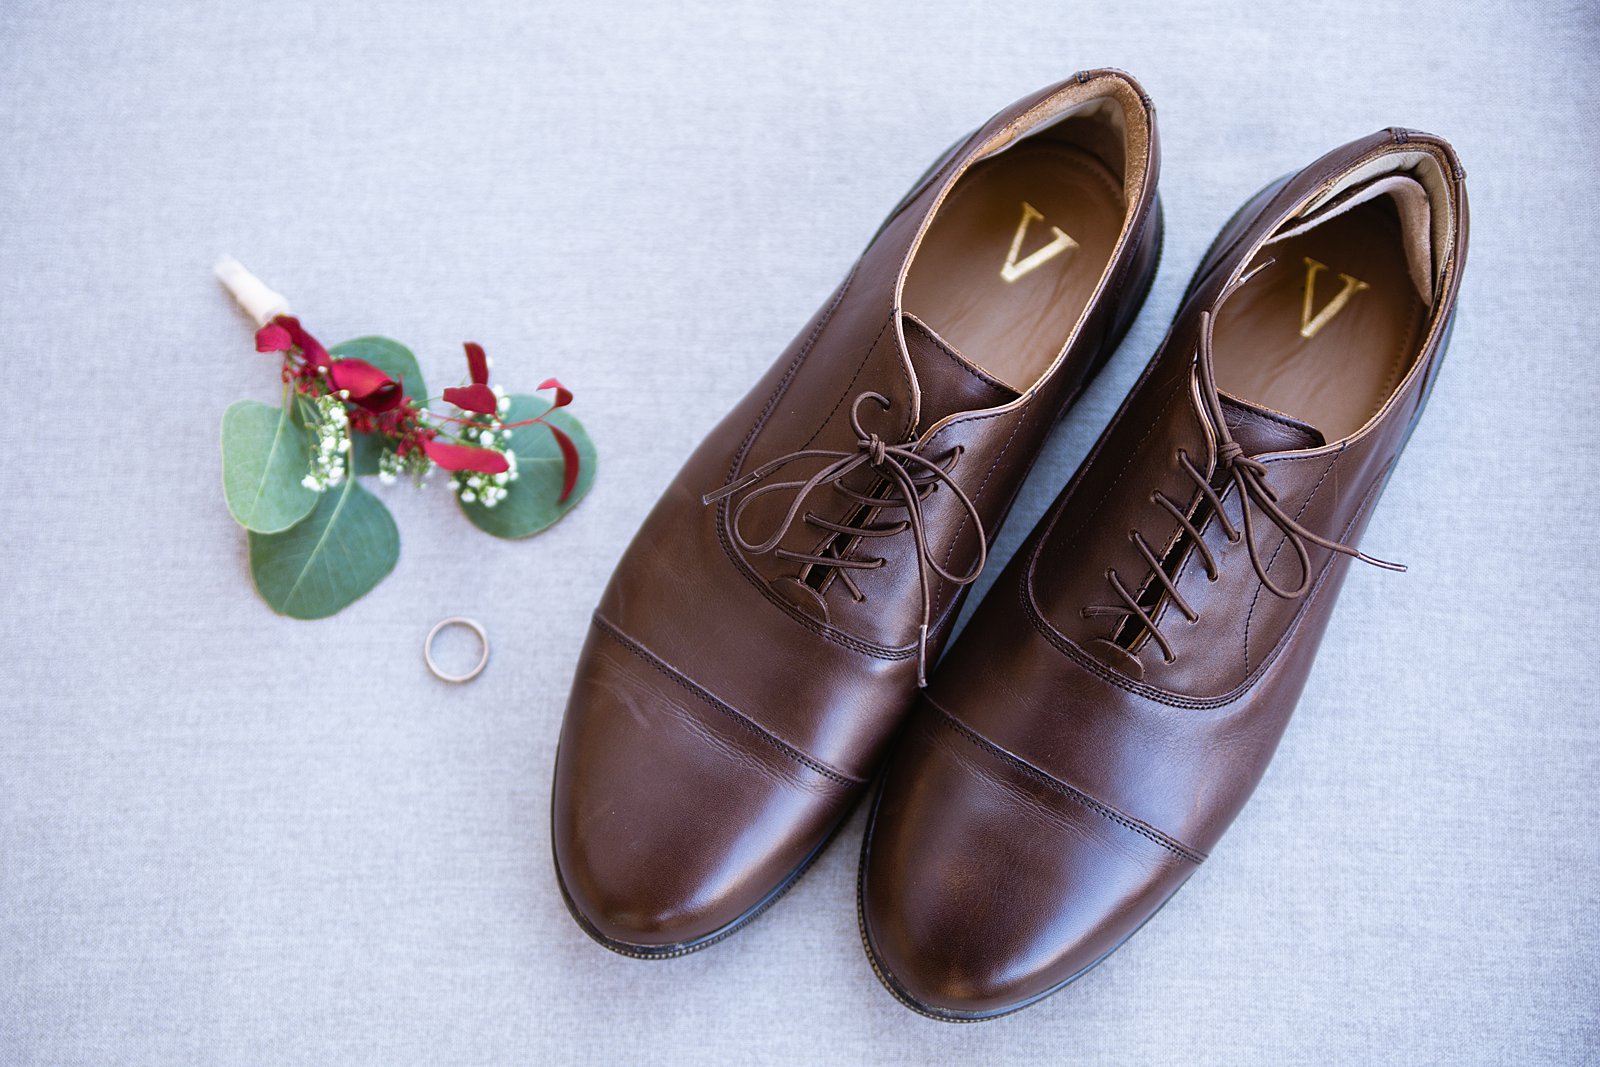 Groom's wedding day details of his wedding ring, shoes, and boutonniere by PMA Photography.